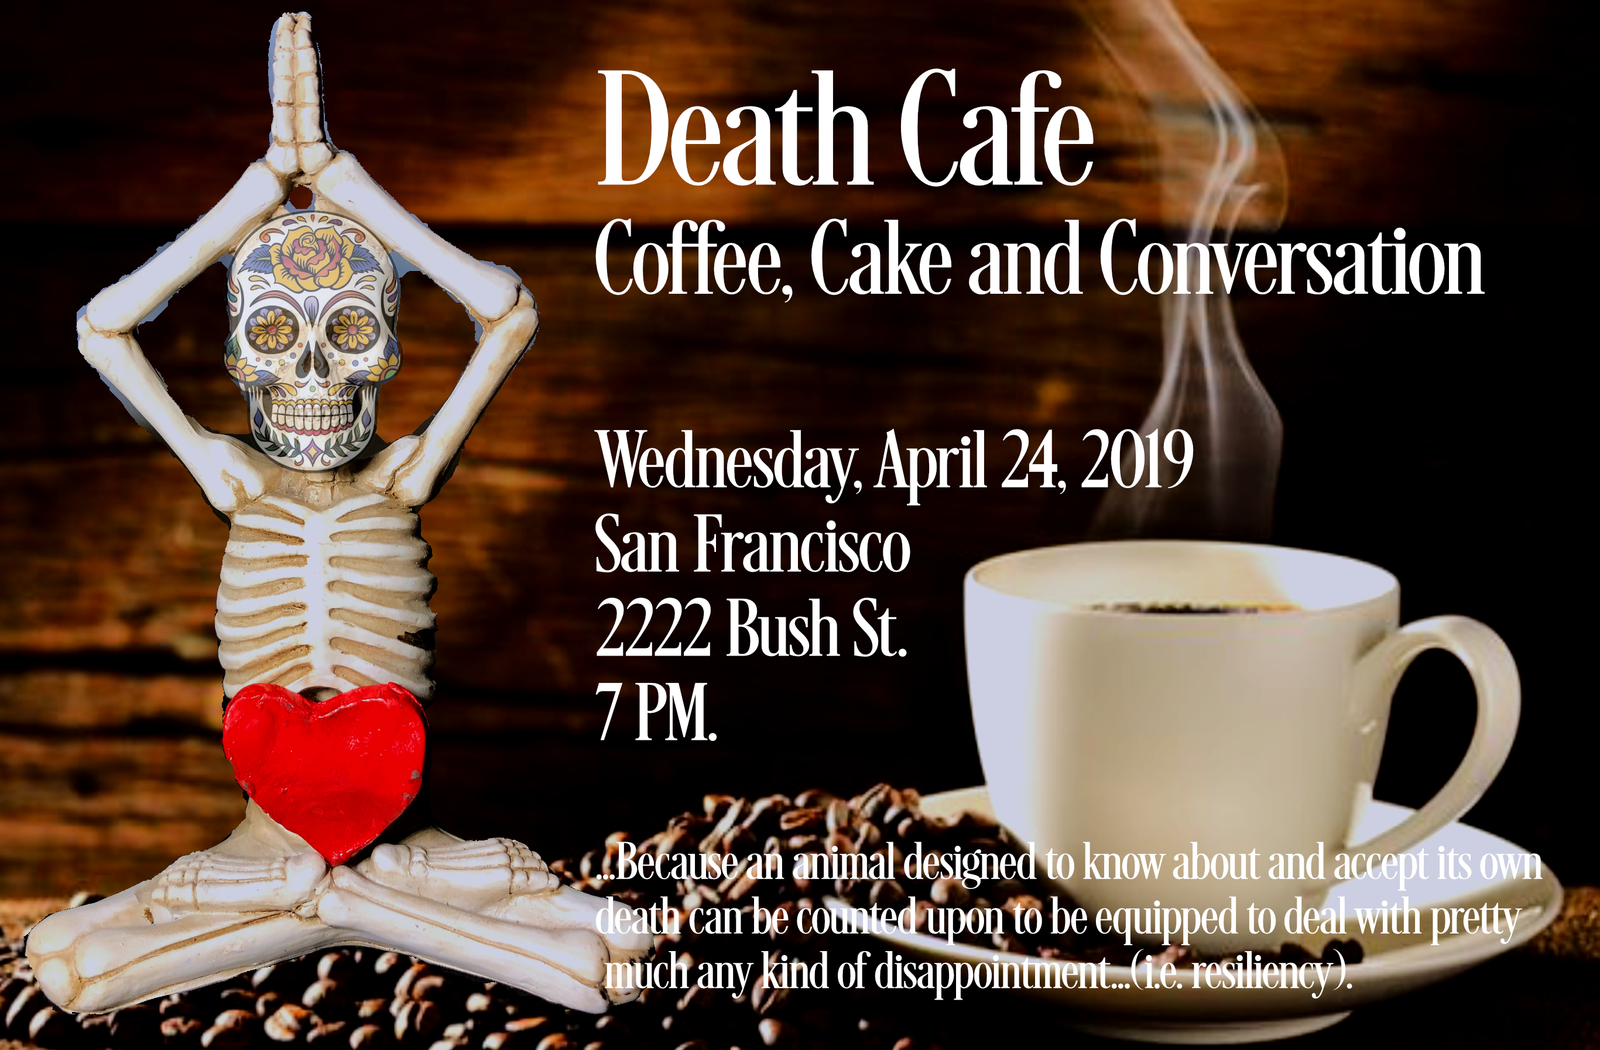 Death Cafe at Fillmore in S.F.